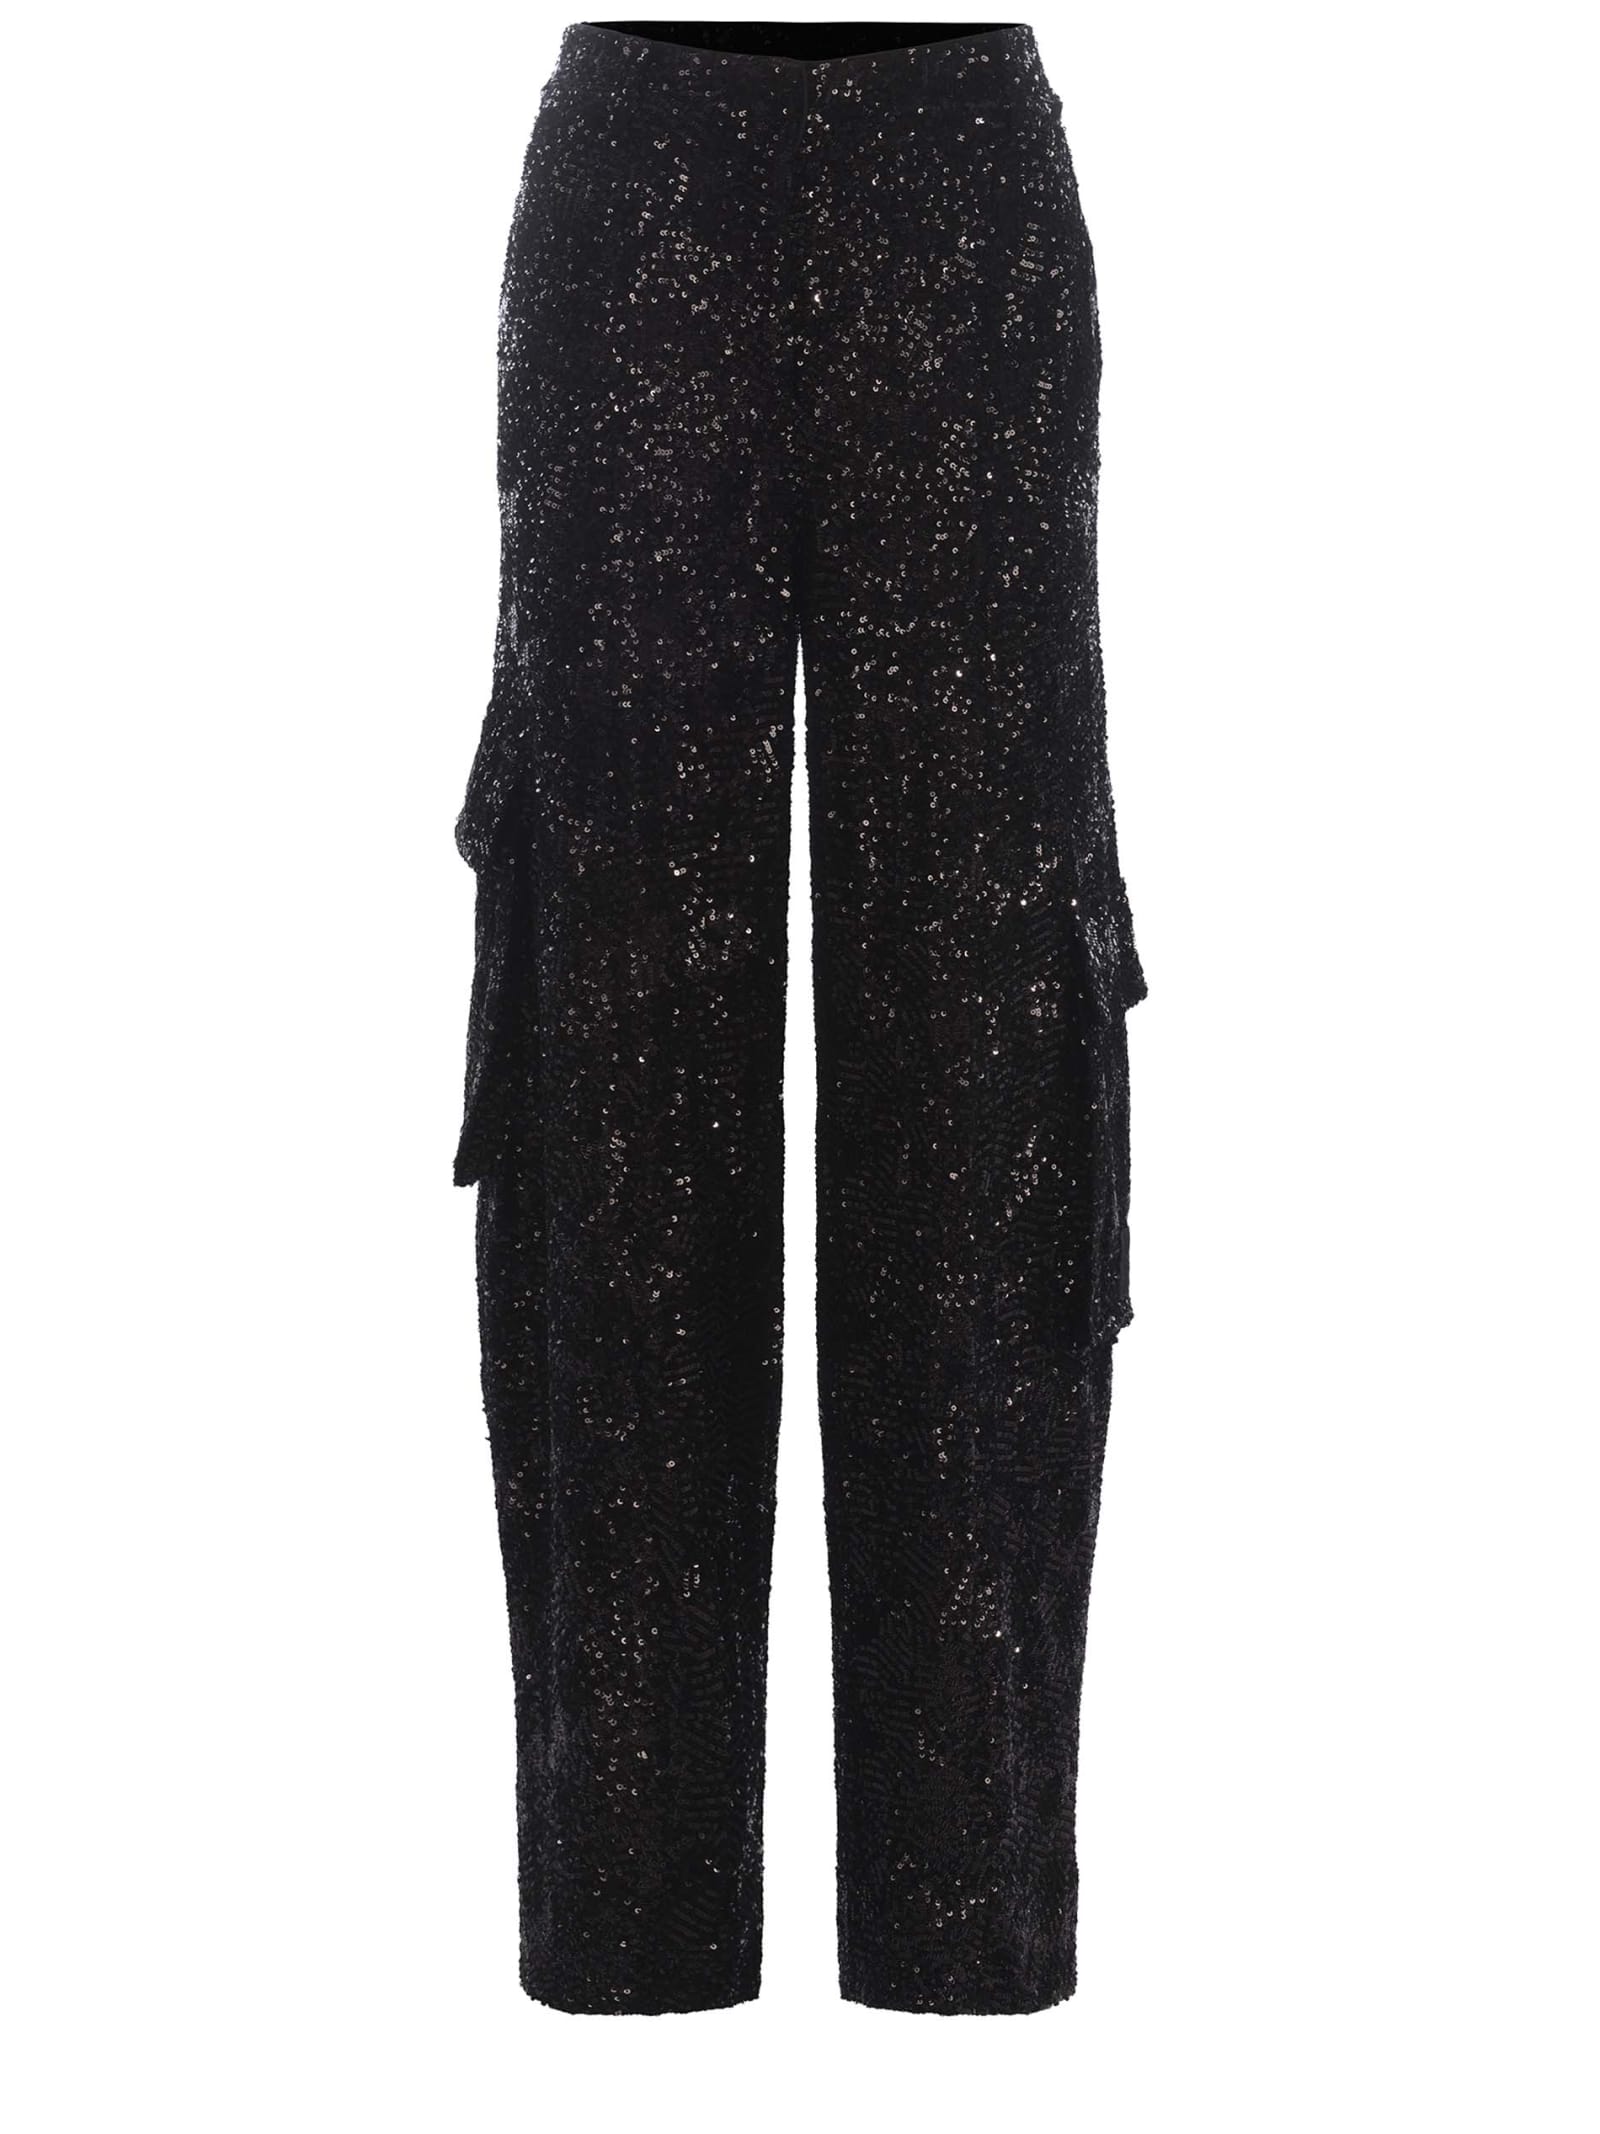 Trousers Rotate Made With Sequins